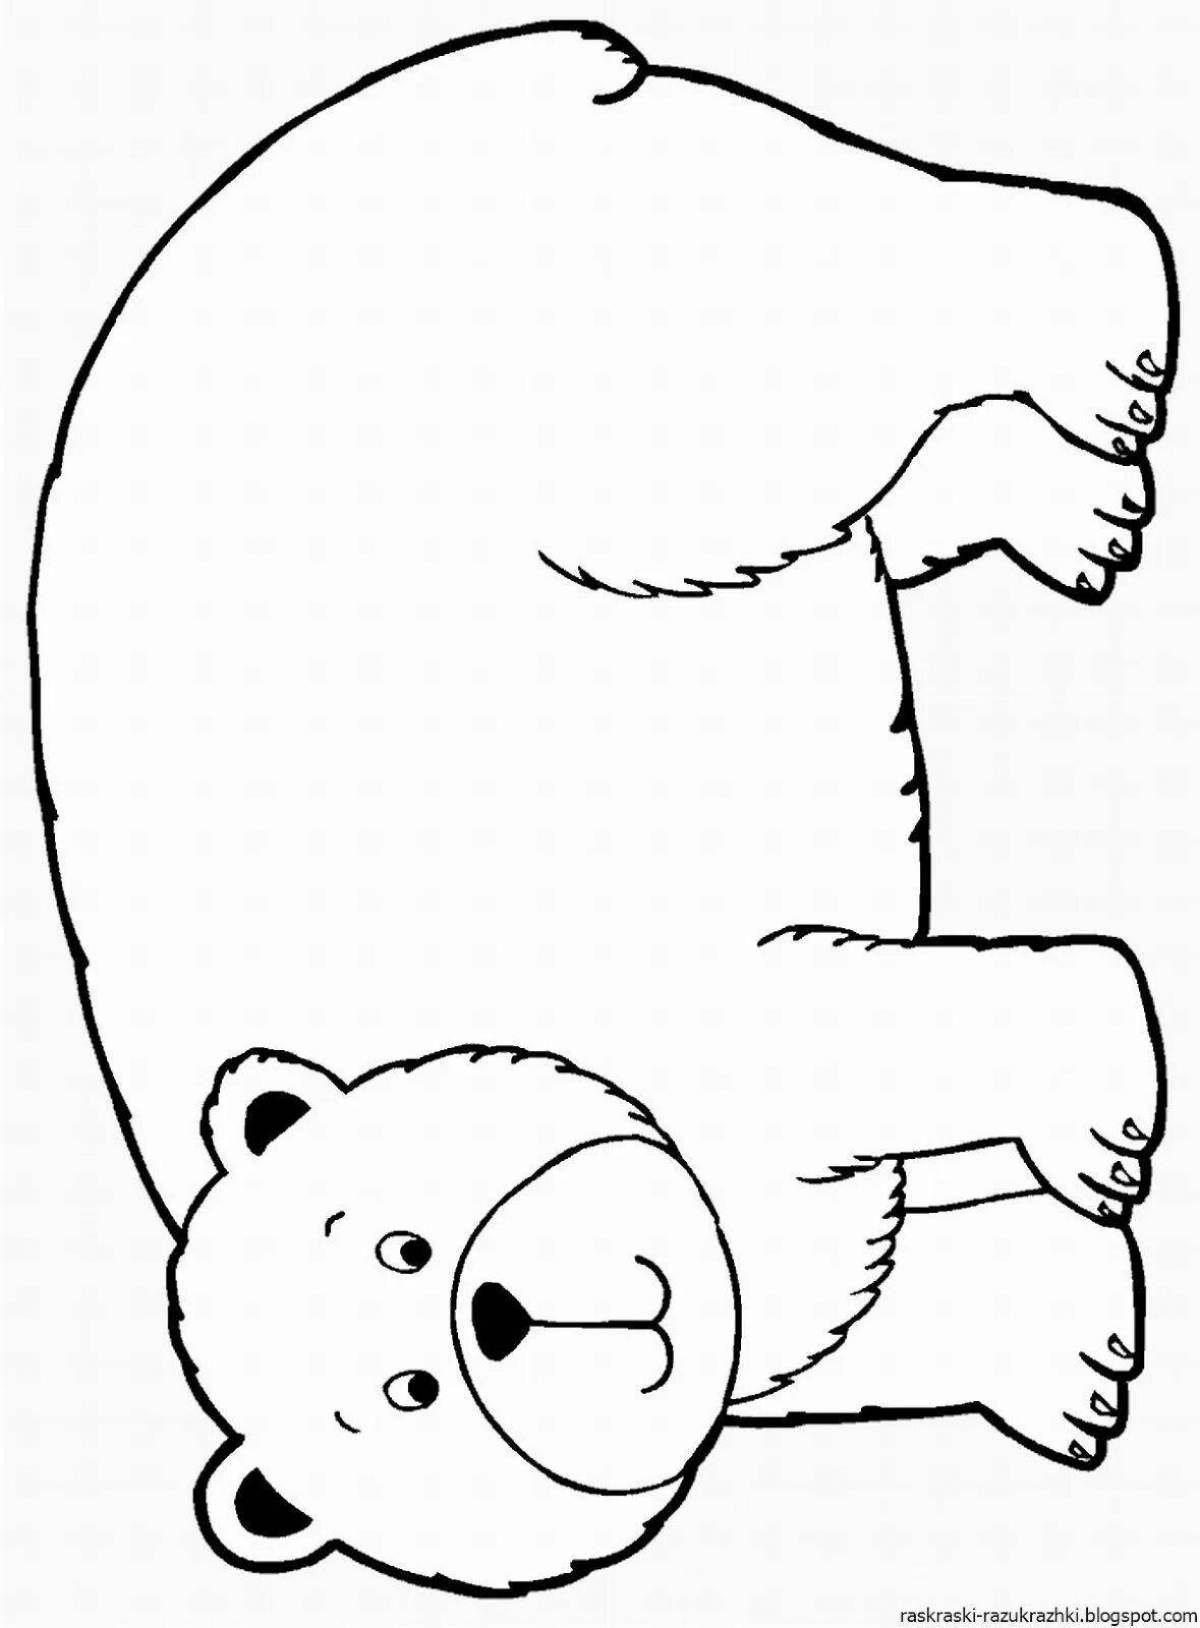 Coloring book friendly bear for children 2-3 years old